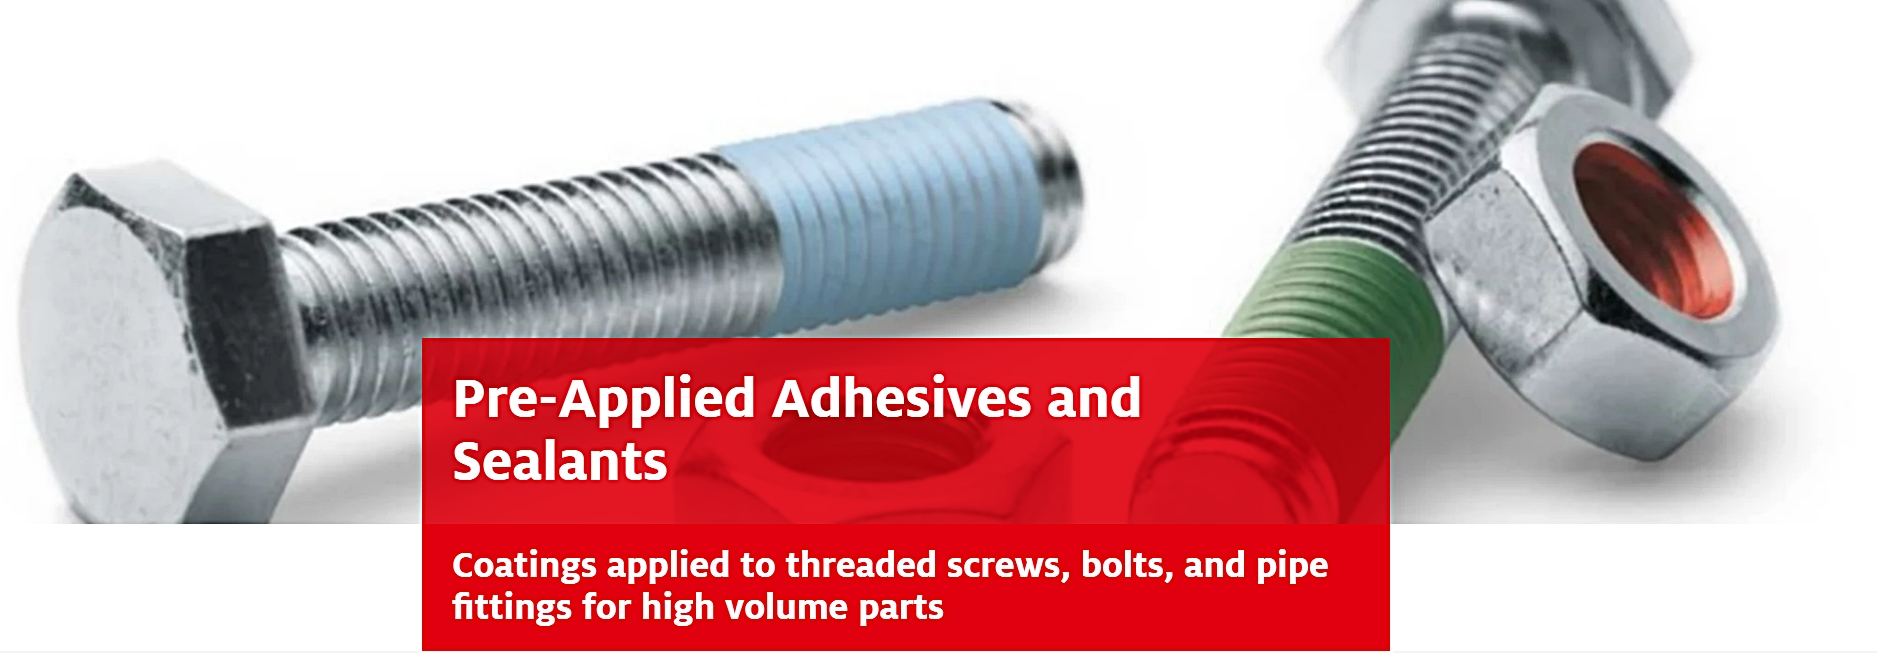 Pre-Applied Adhesives and Sealants